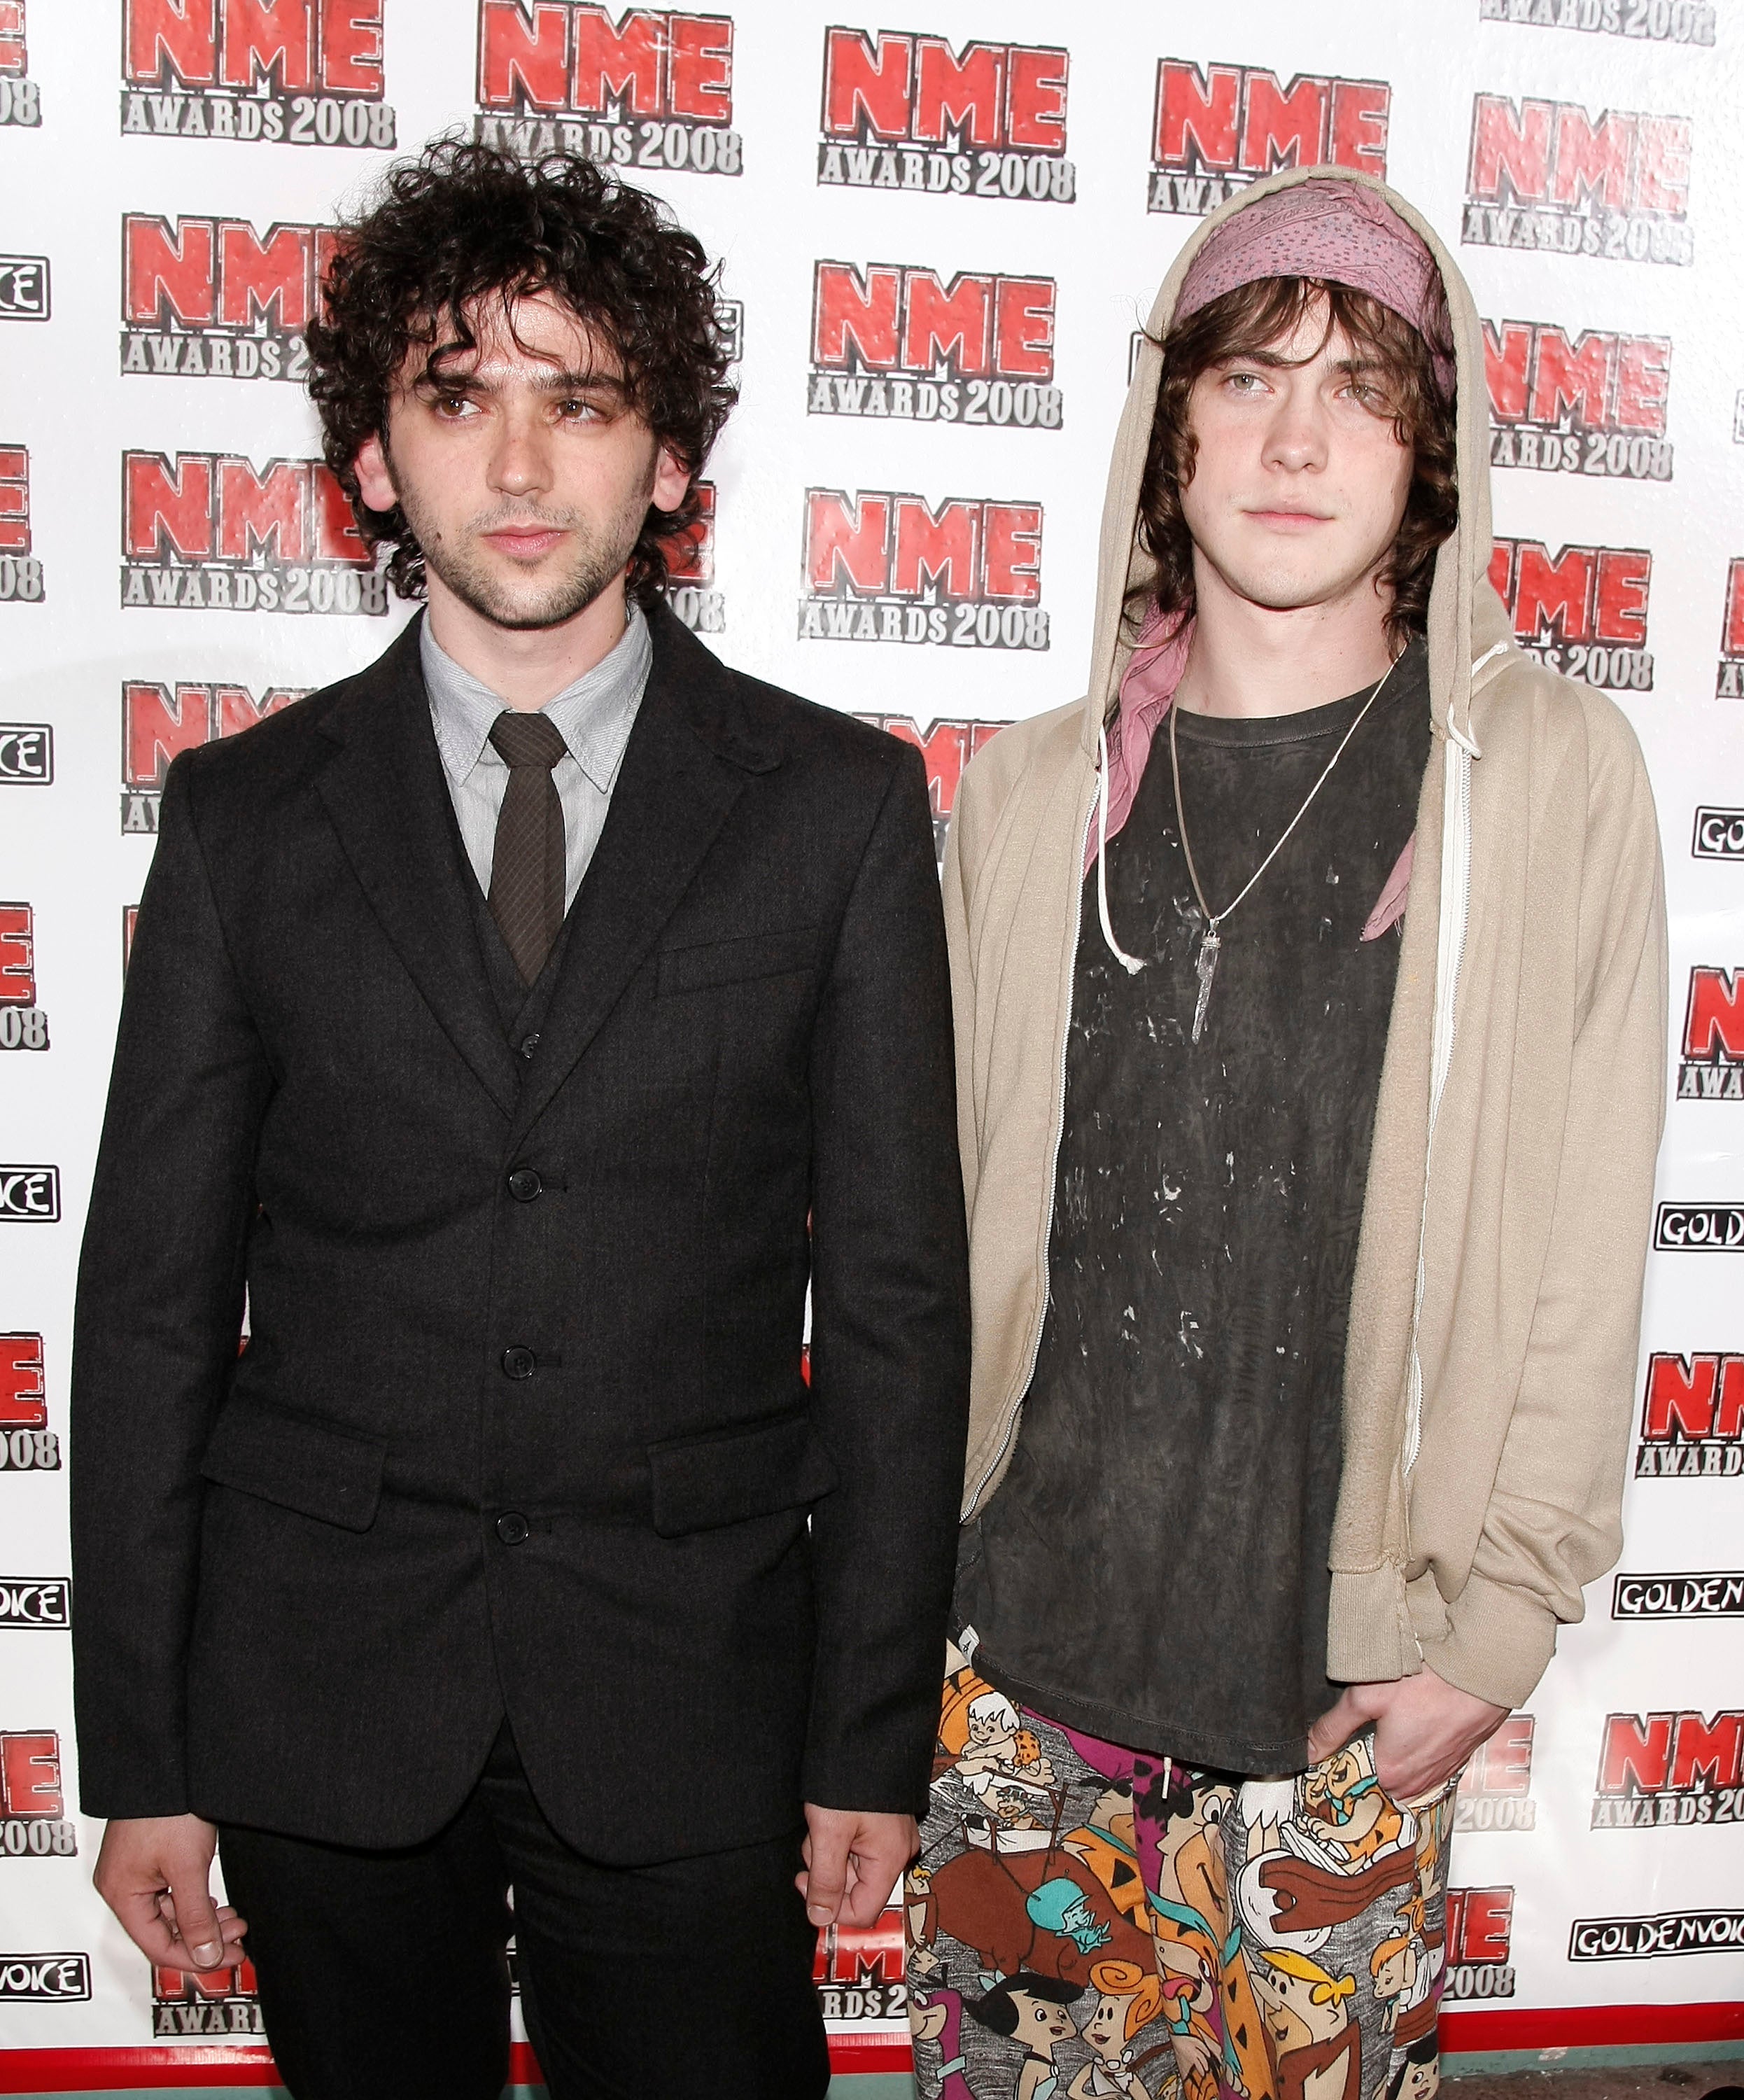 Goldwasser and VanWyngarden of MGMT arrive at the 1st Annual US NME Awards in 2008